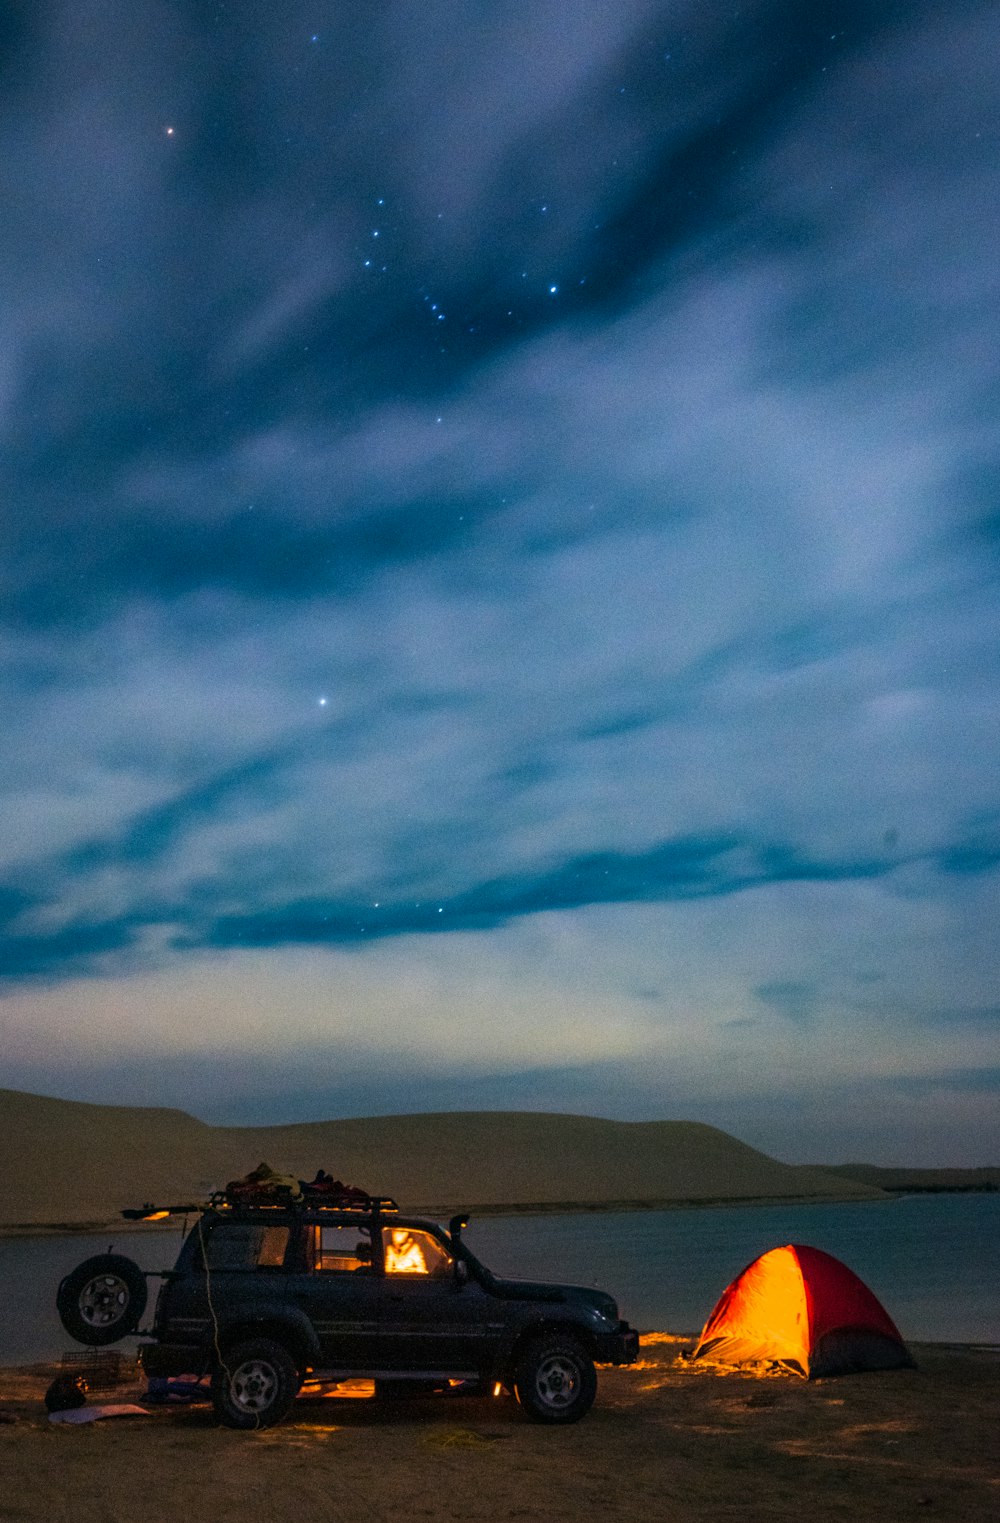 a truck parked next to a tent under a night sky